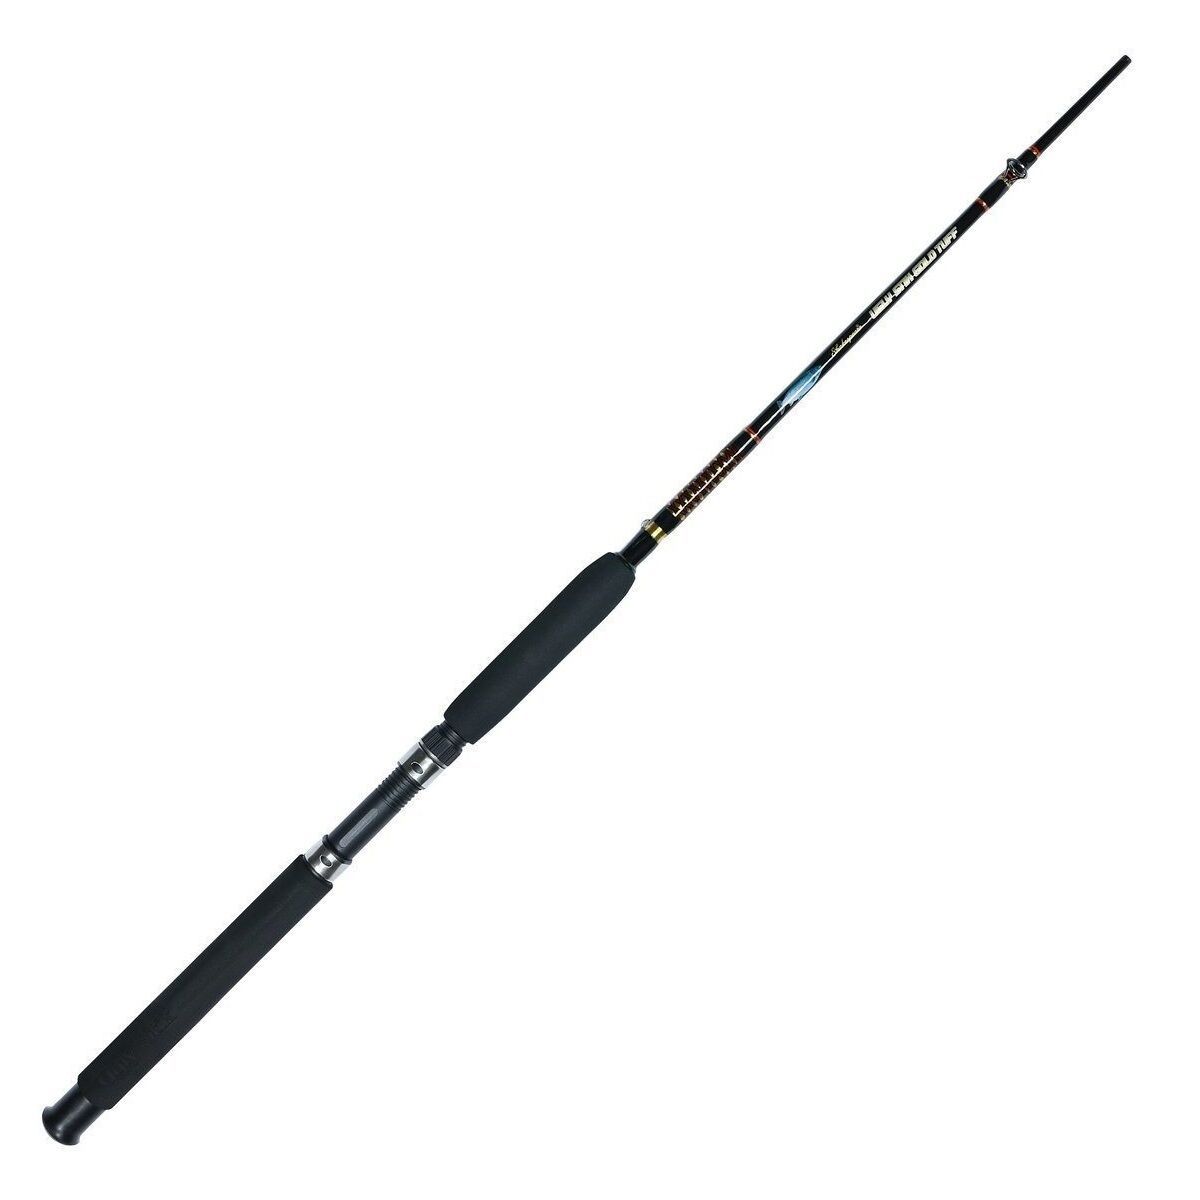 https://www.total-fishing-tackle.com/media/catalog/product/cache/c4fc4656f1ace5fcc9cefe1458e45406/s/h/shakespeare-ugly-stik-gold-tiger-tuff-1_1.jpg